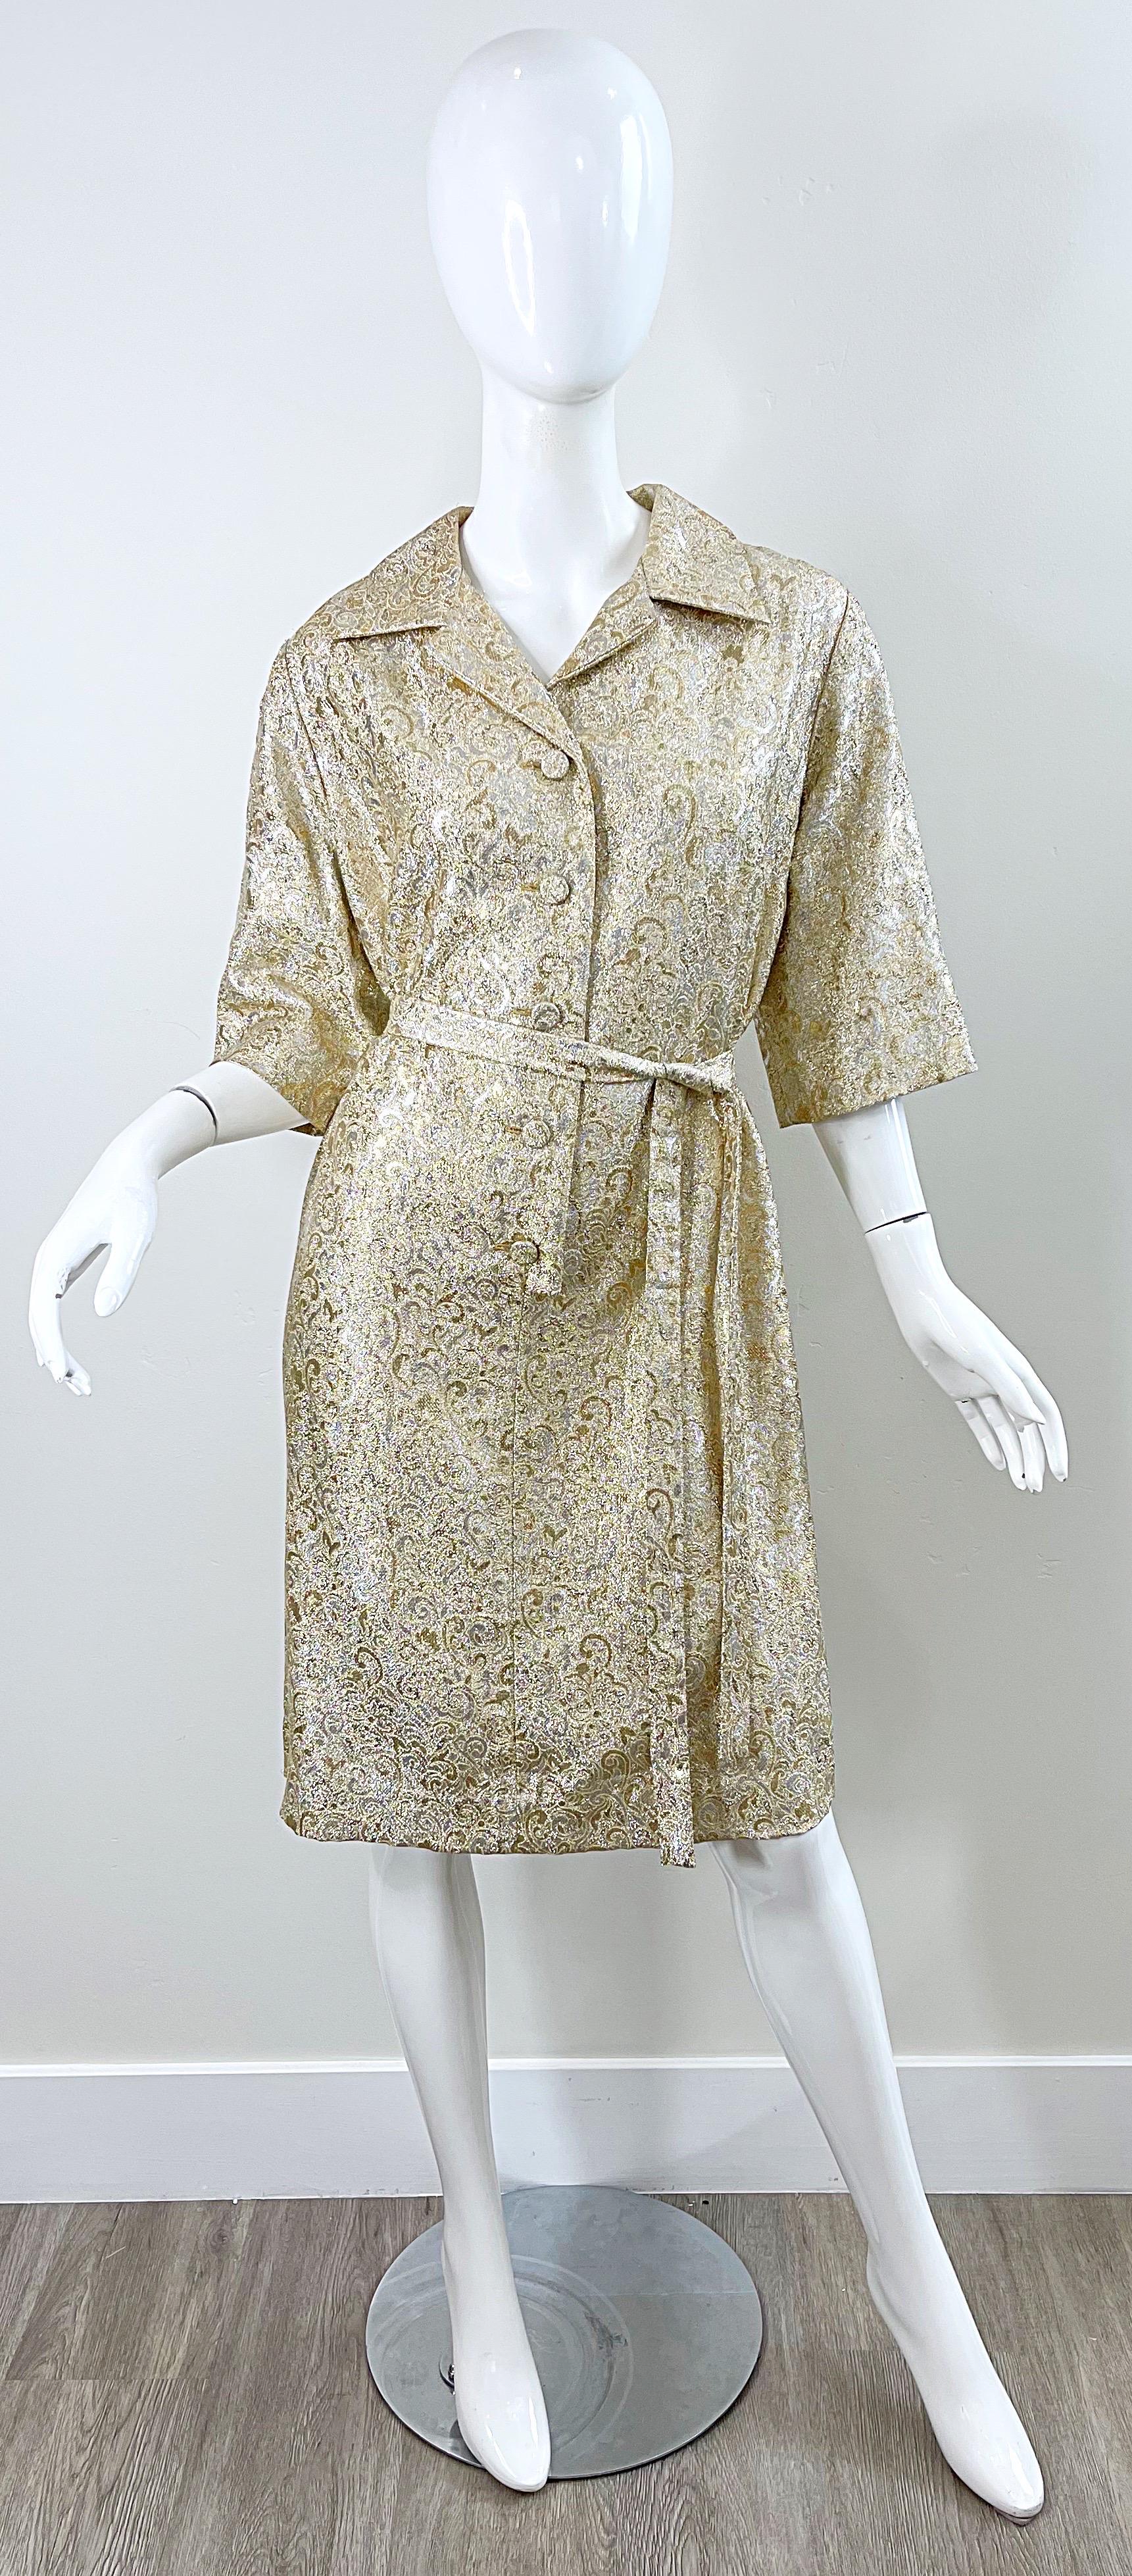 Chic 1960s larger size gold and silver silk brocade belted shirt dress ! Features 5 fabric covered buttons up the front. Detachable matching tie sash belt. Flattering 3/4 sleeves. Perfect for and day or evening event. Pair with sandals, wedges or